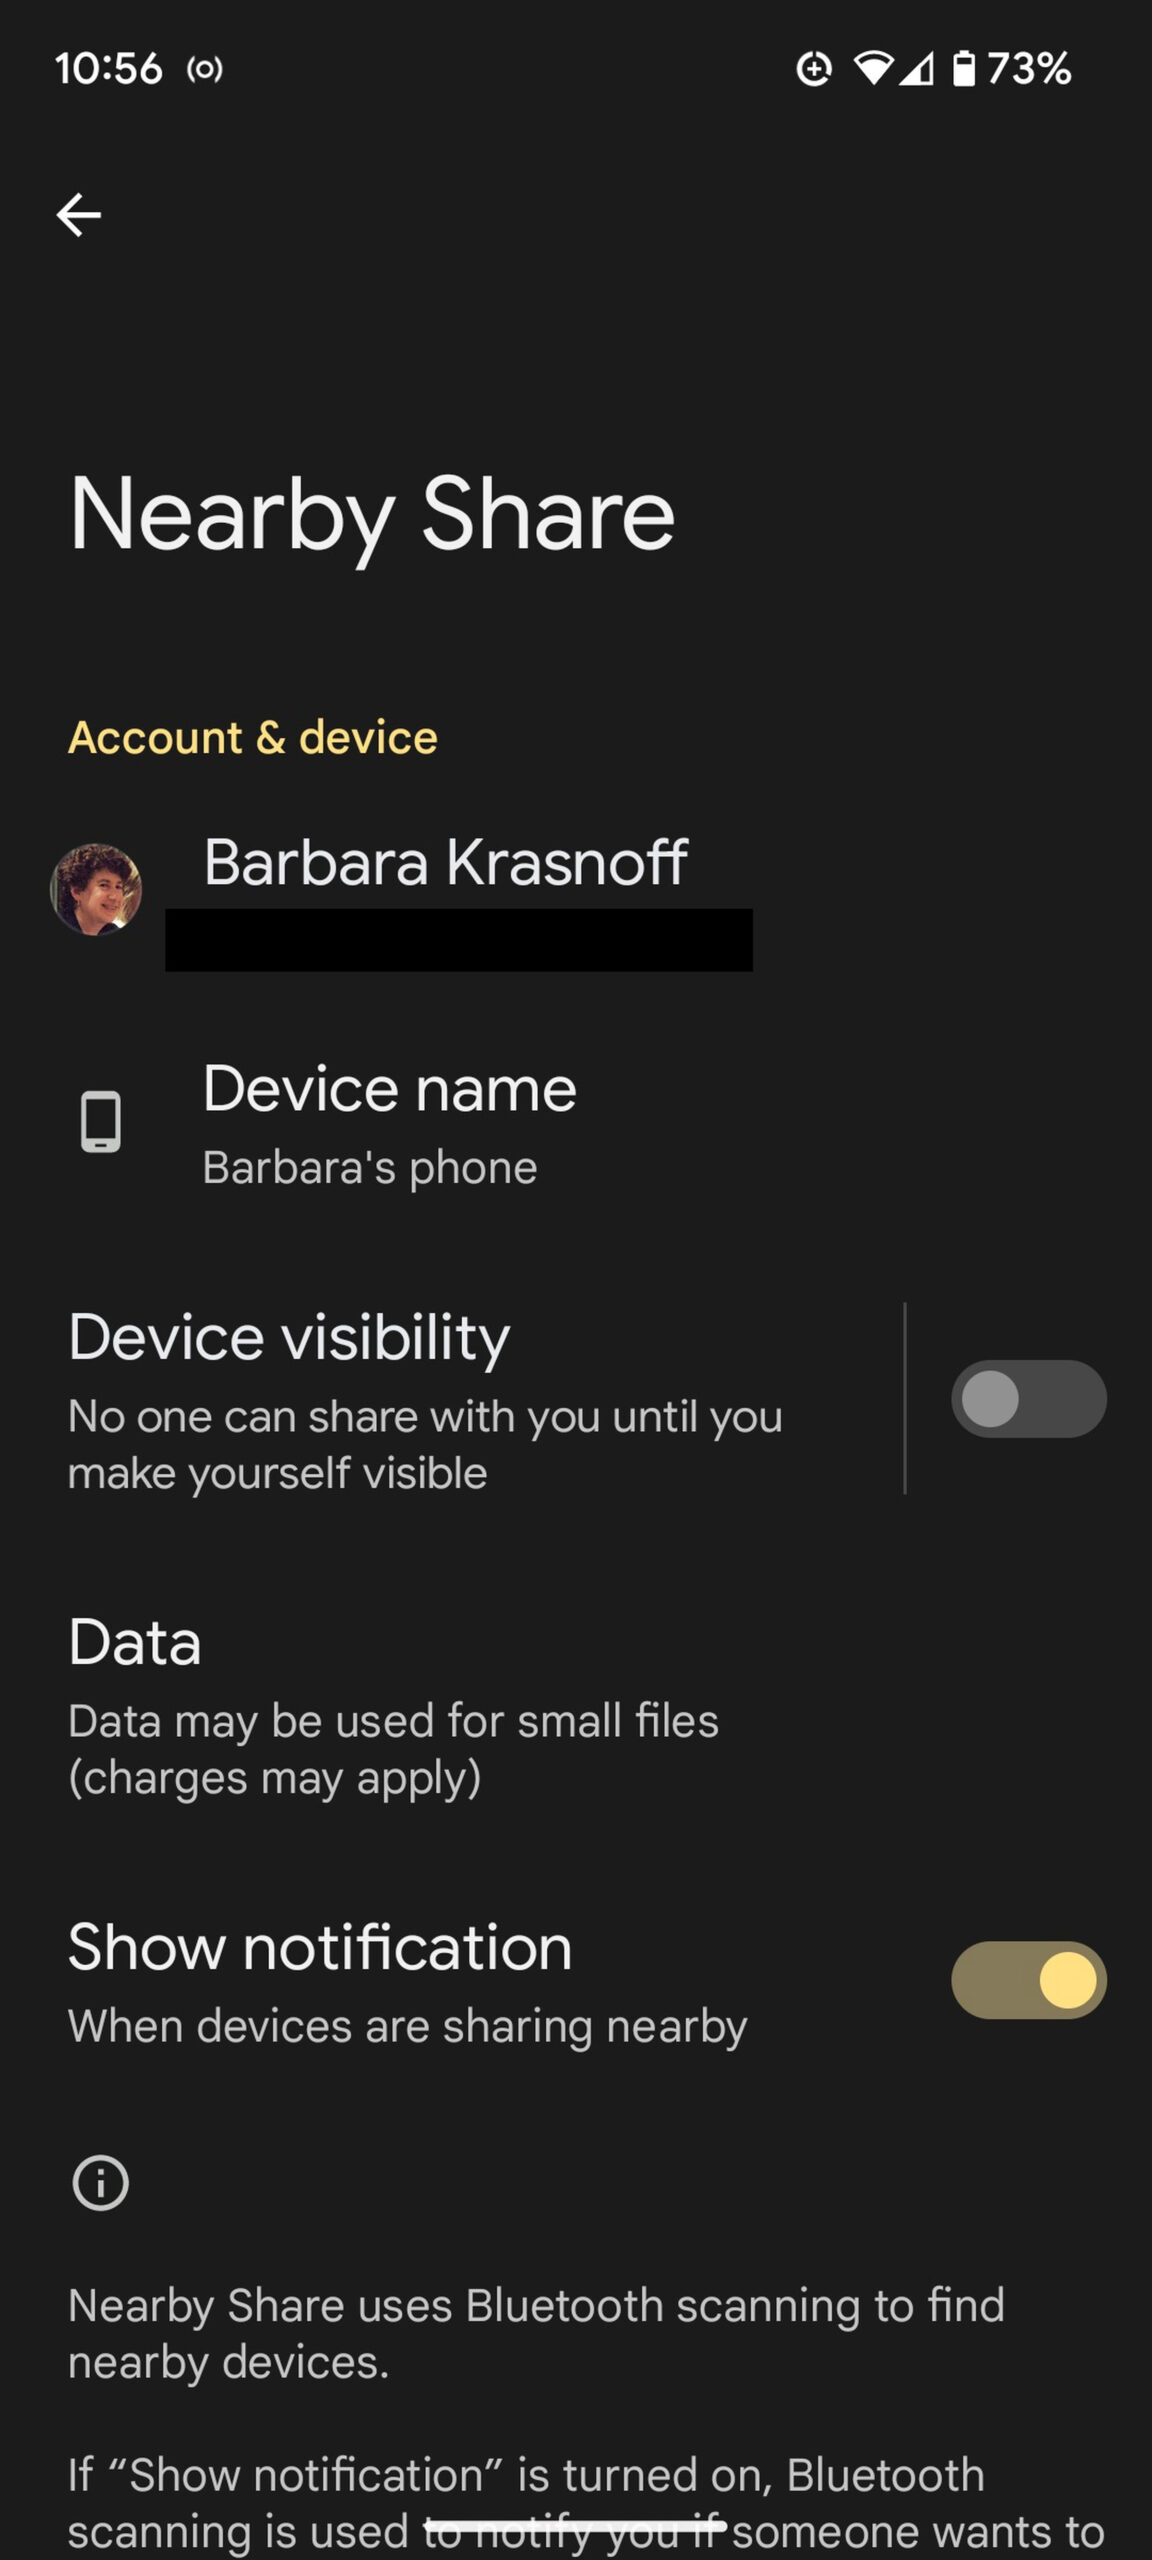 Nearby Share page with the user’s name, Device Name, and other options, Device visibility is toggled off.